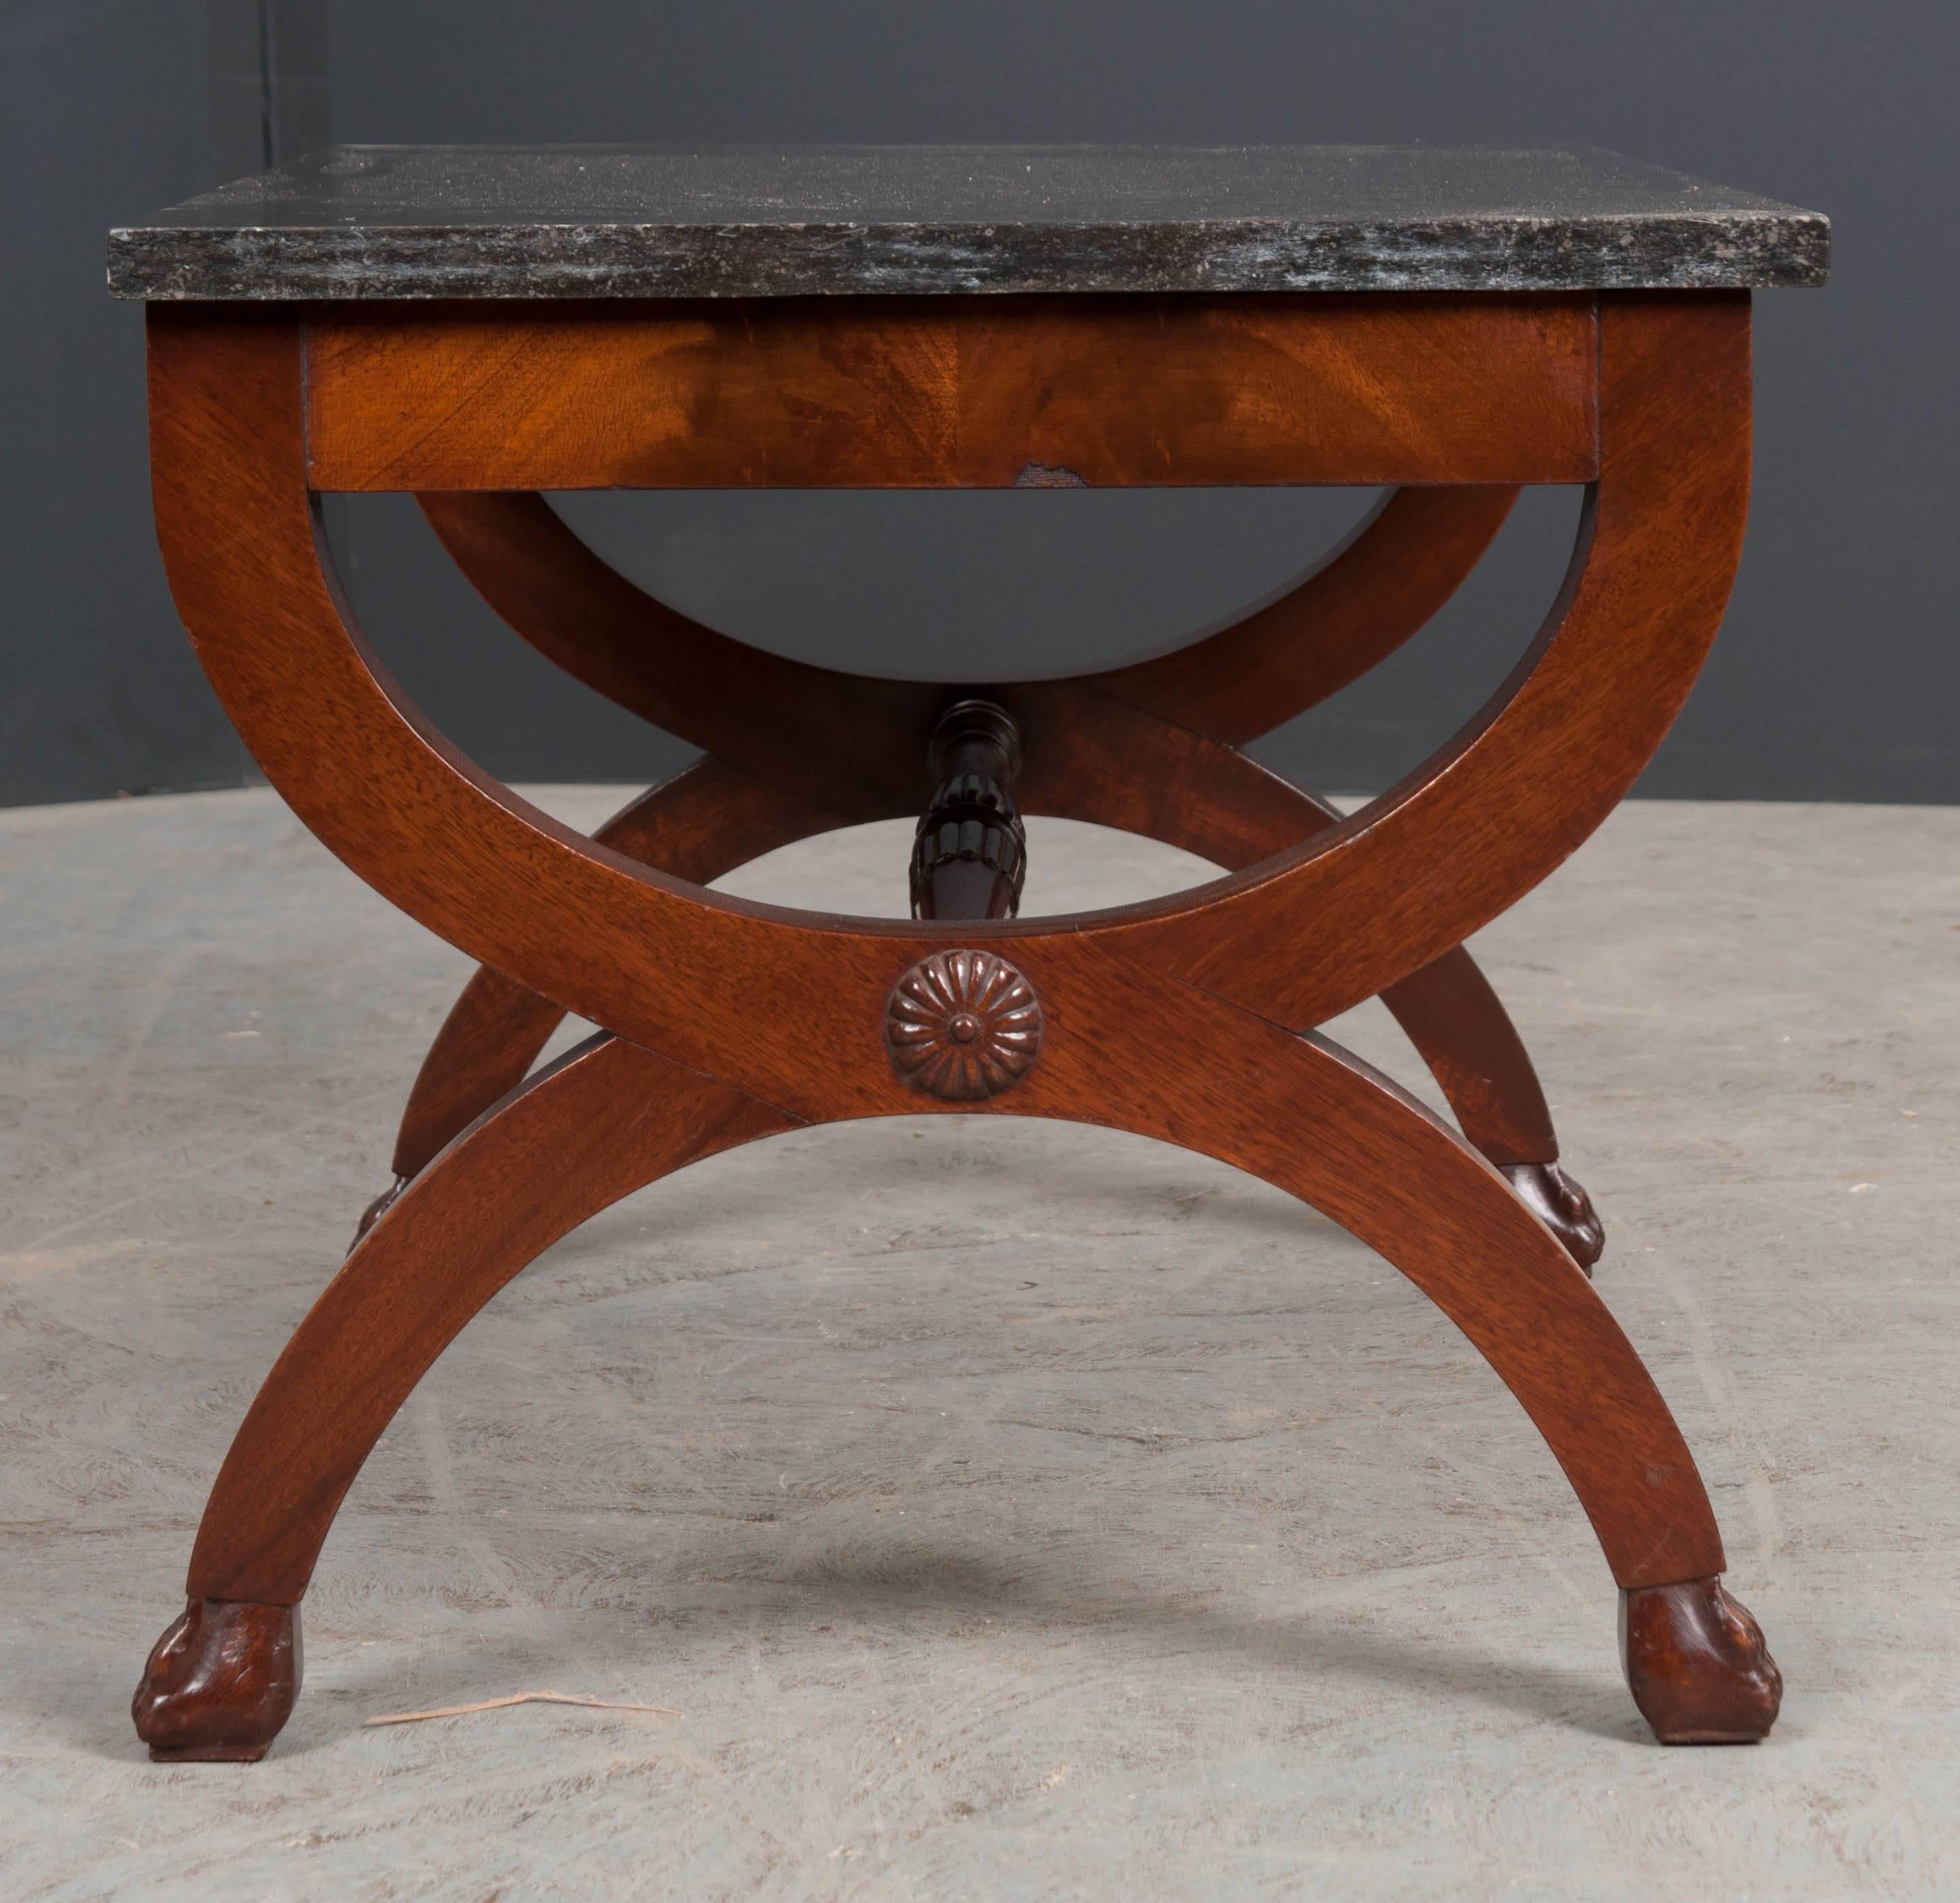 A refined coffee table, made in the French Restauration style at the end of the 19th century. The table is topped in a beautiful piece of black fossil marble. The curule-form base is braced by a turned mahogany stretcher that has been styled with